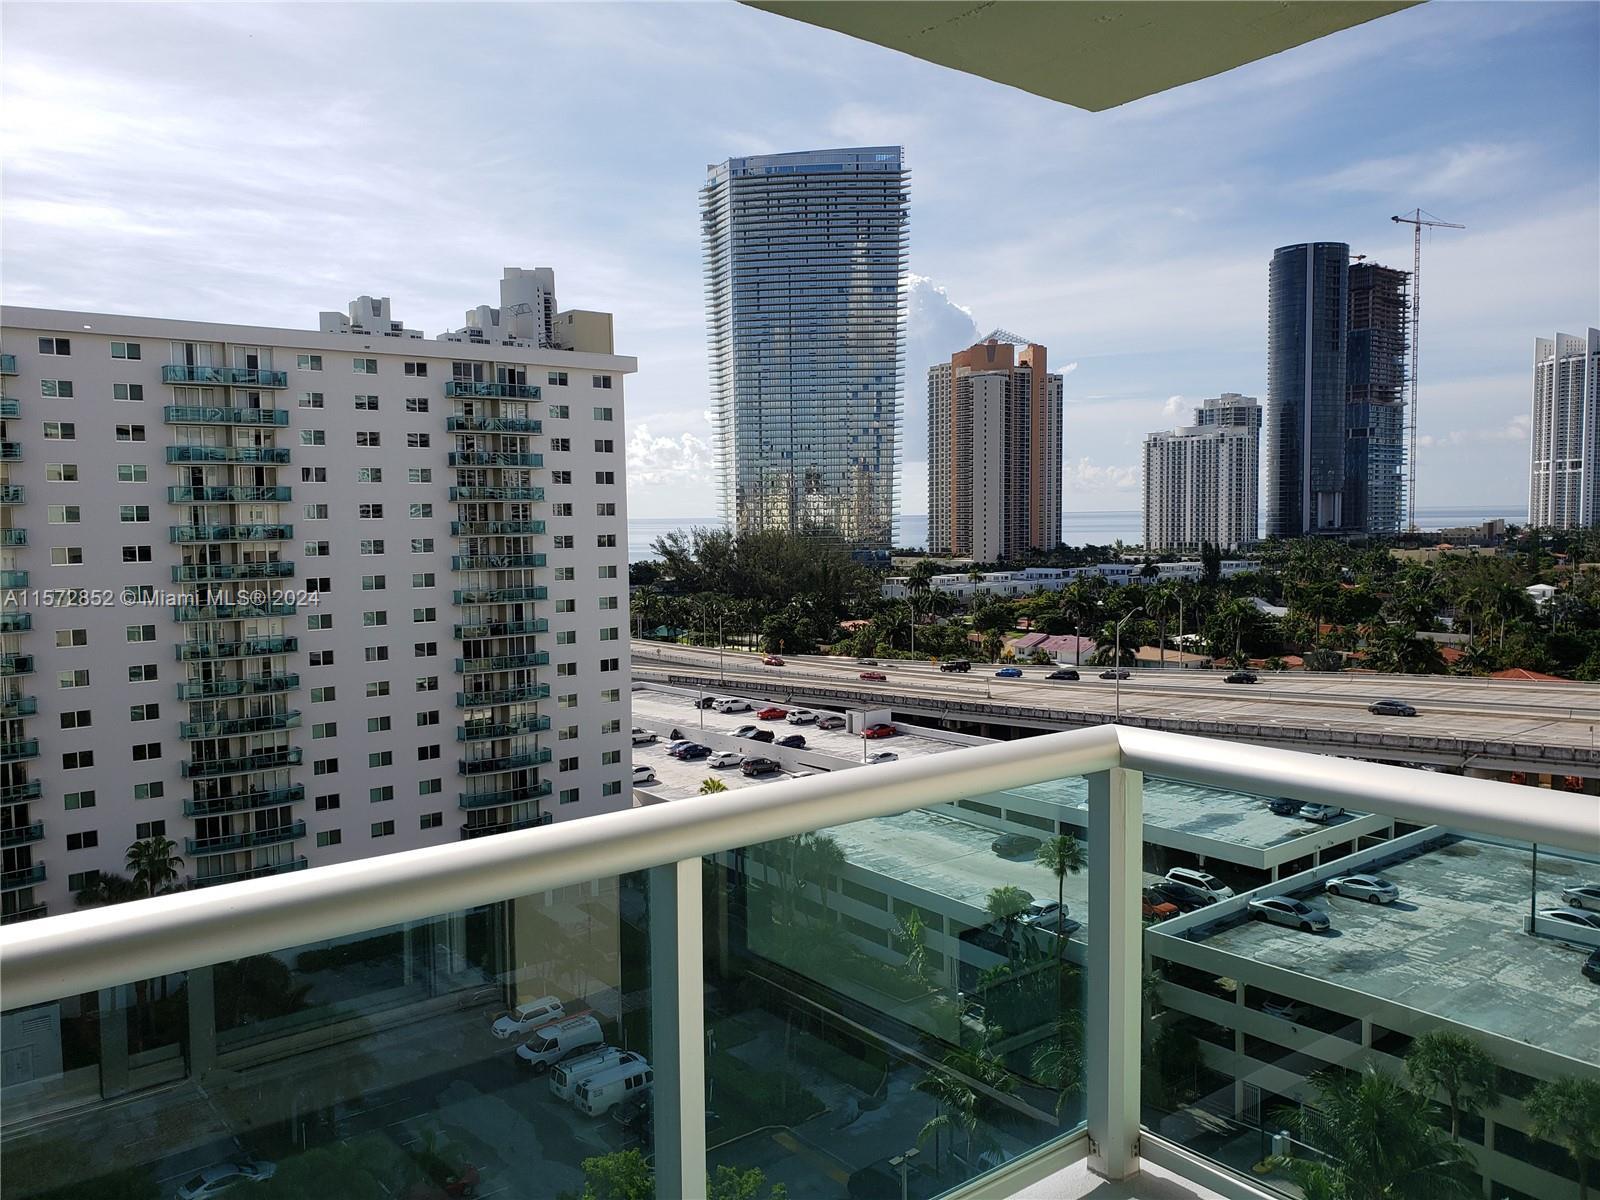 Photo of 19390 Collins Ave #1212 in Sunny Isles Beach, FL